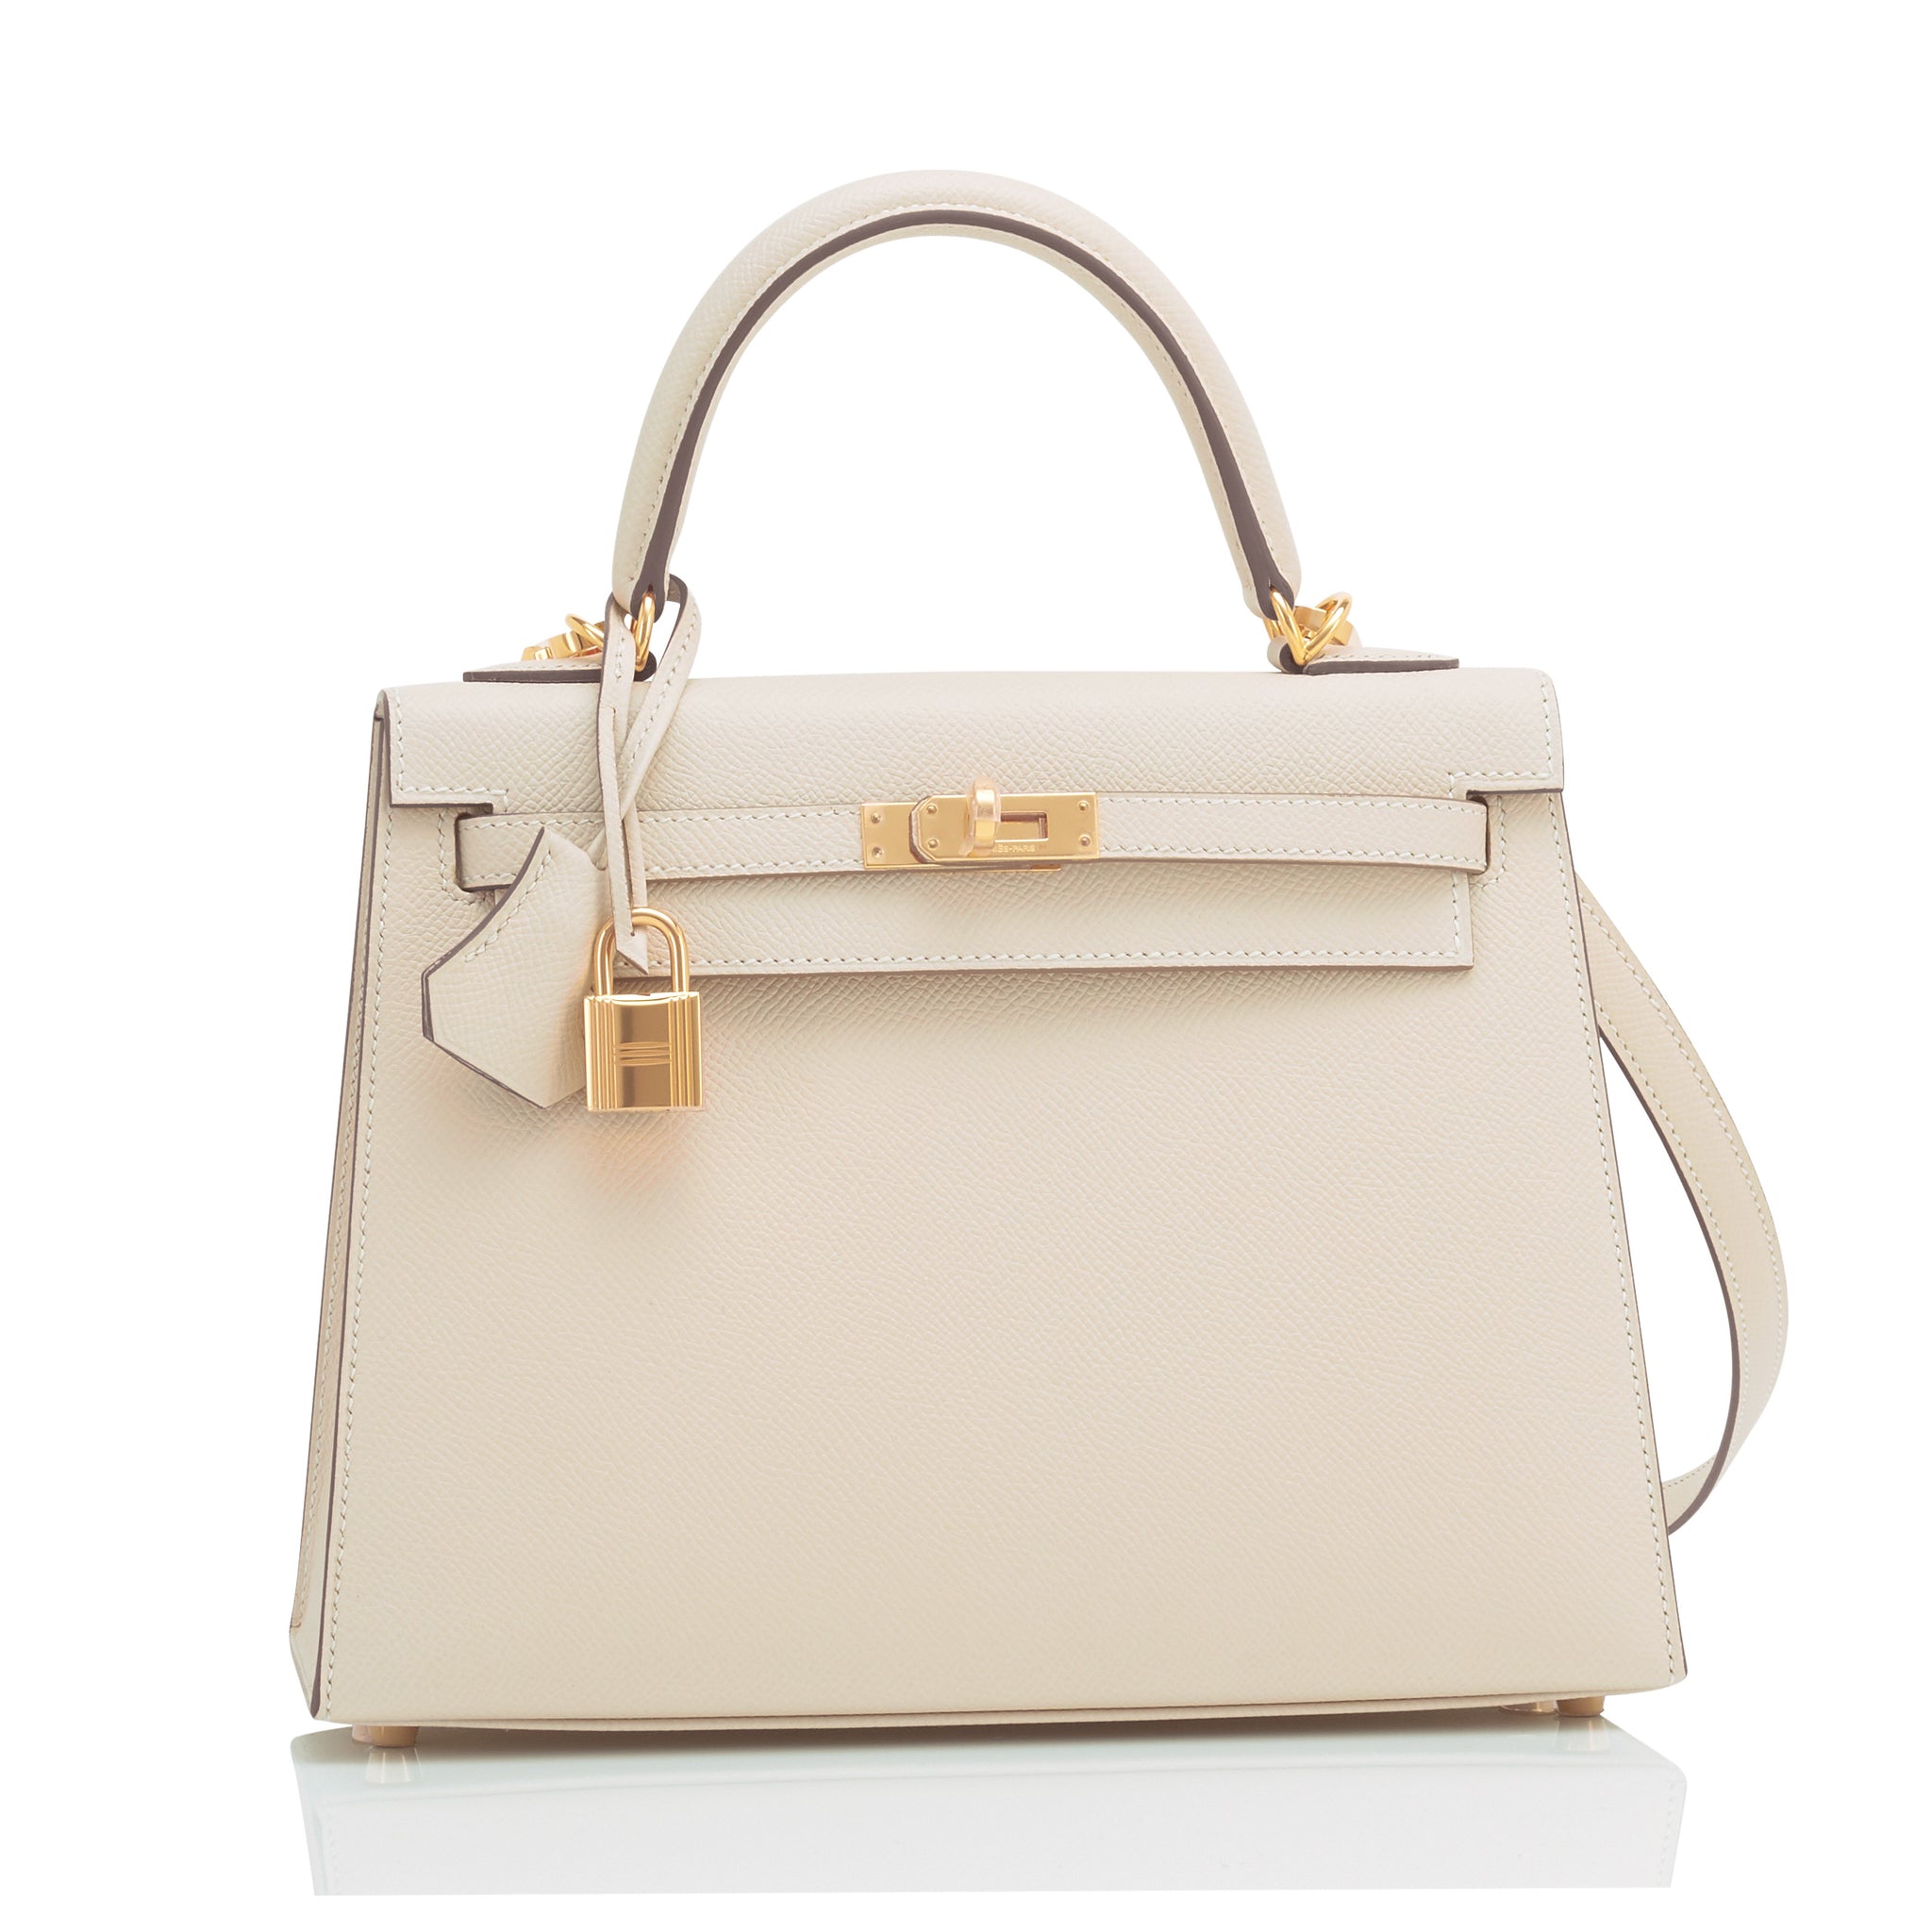 Official news of new Hermes Kelly Mini and its darling details including  price, colors and leathers.